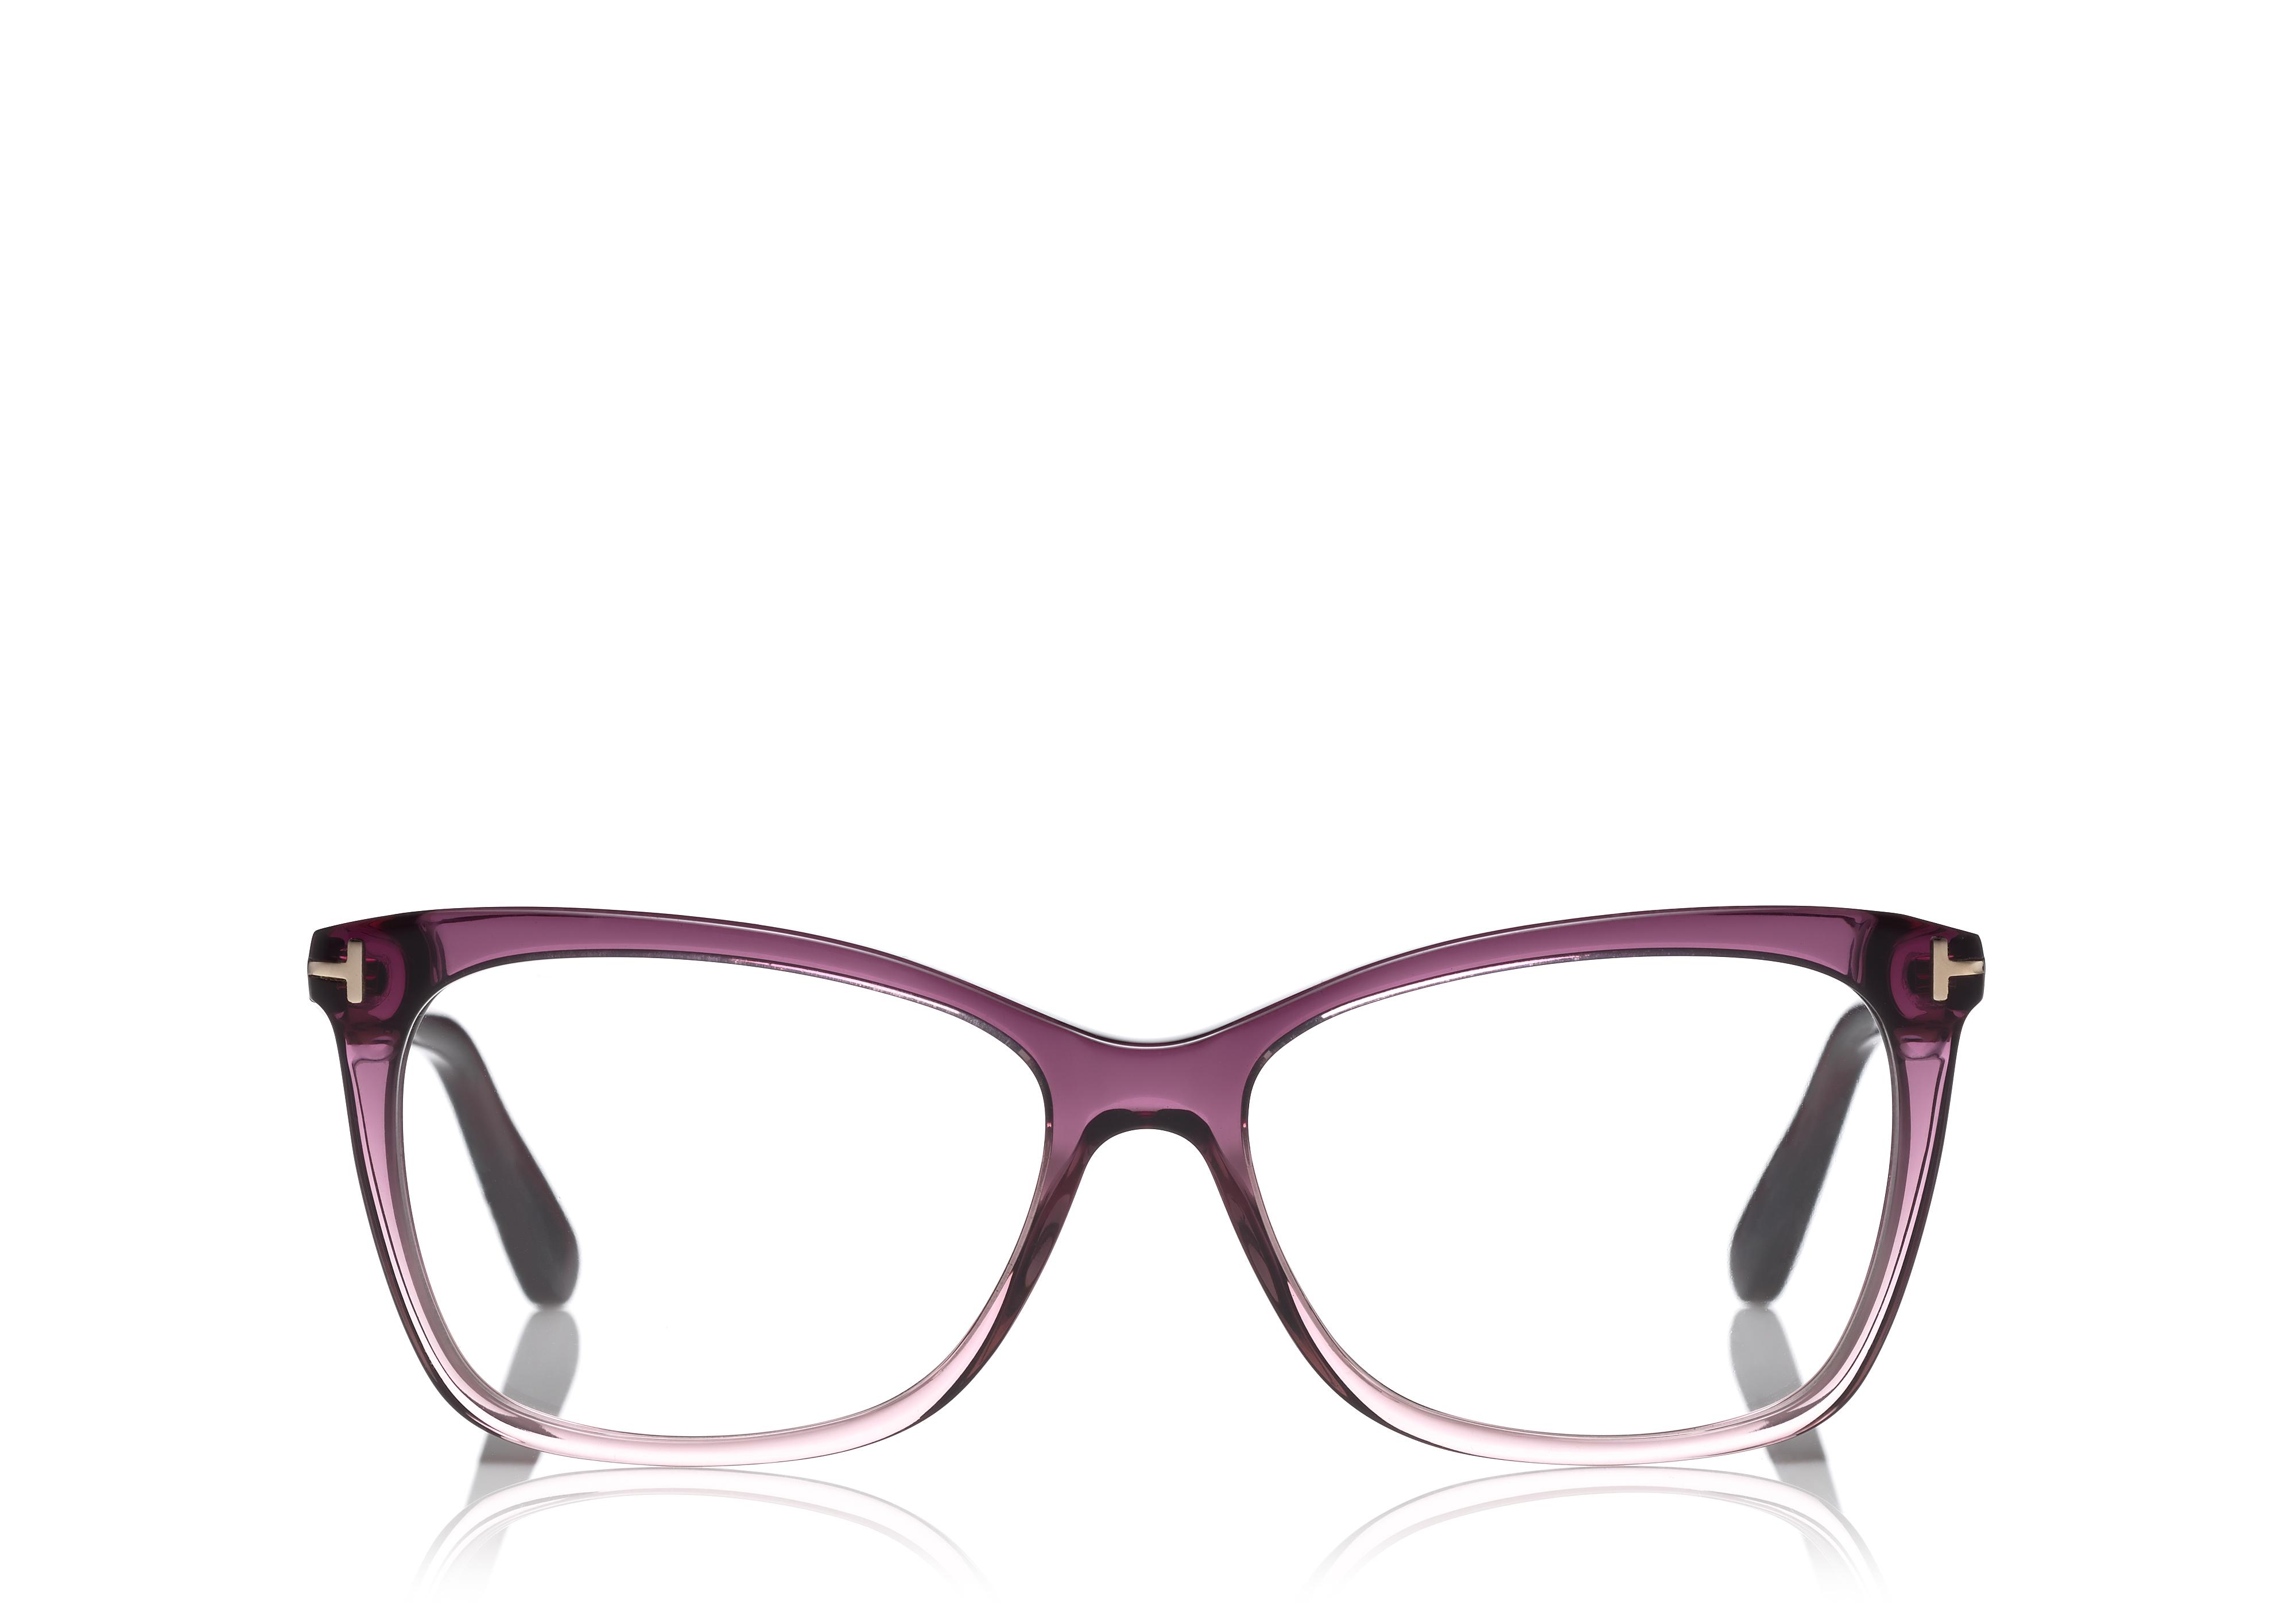 Tom Ford THIN BUTTERFLY OPTICAL FRAME | TomFord.com